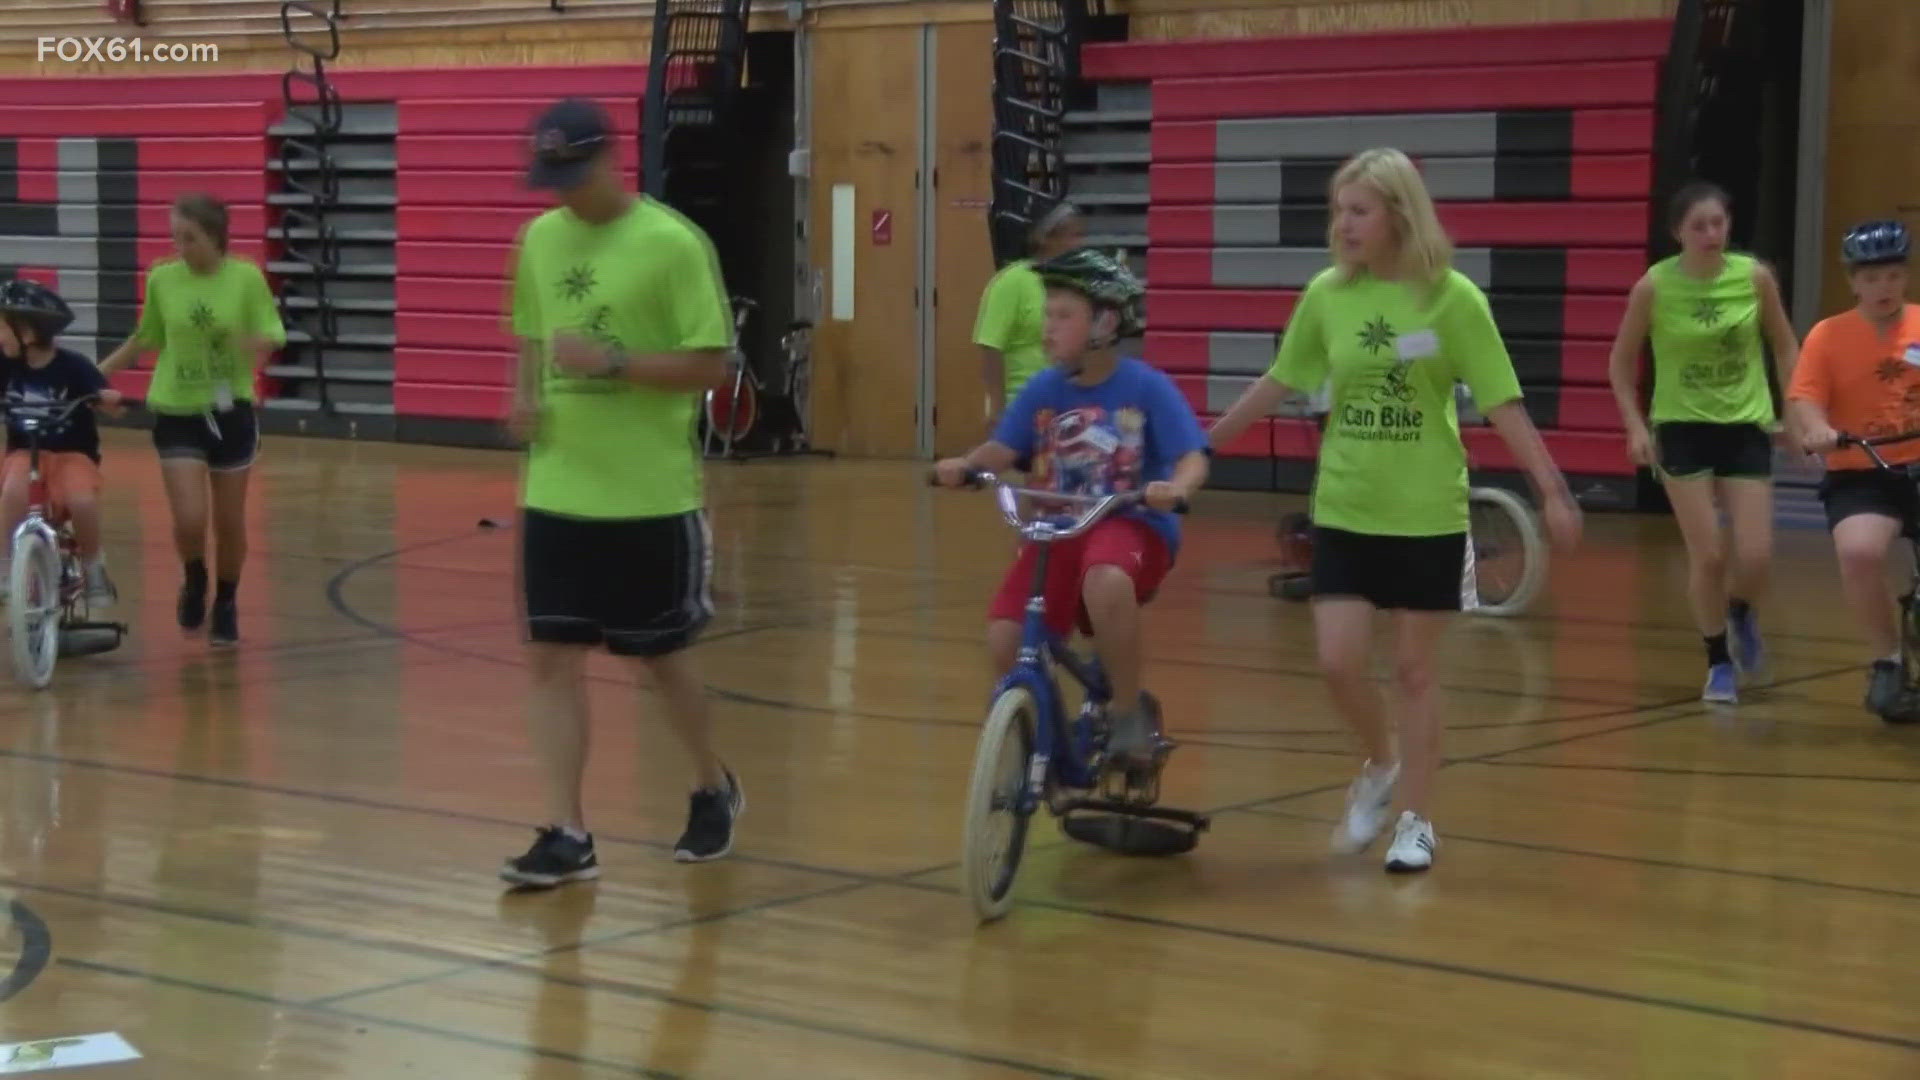 iCan Bike uses adapted bicycles to teach people of all abilities to ride a two-wheel bike.